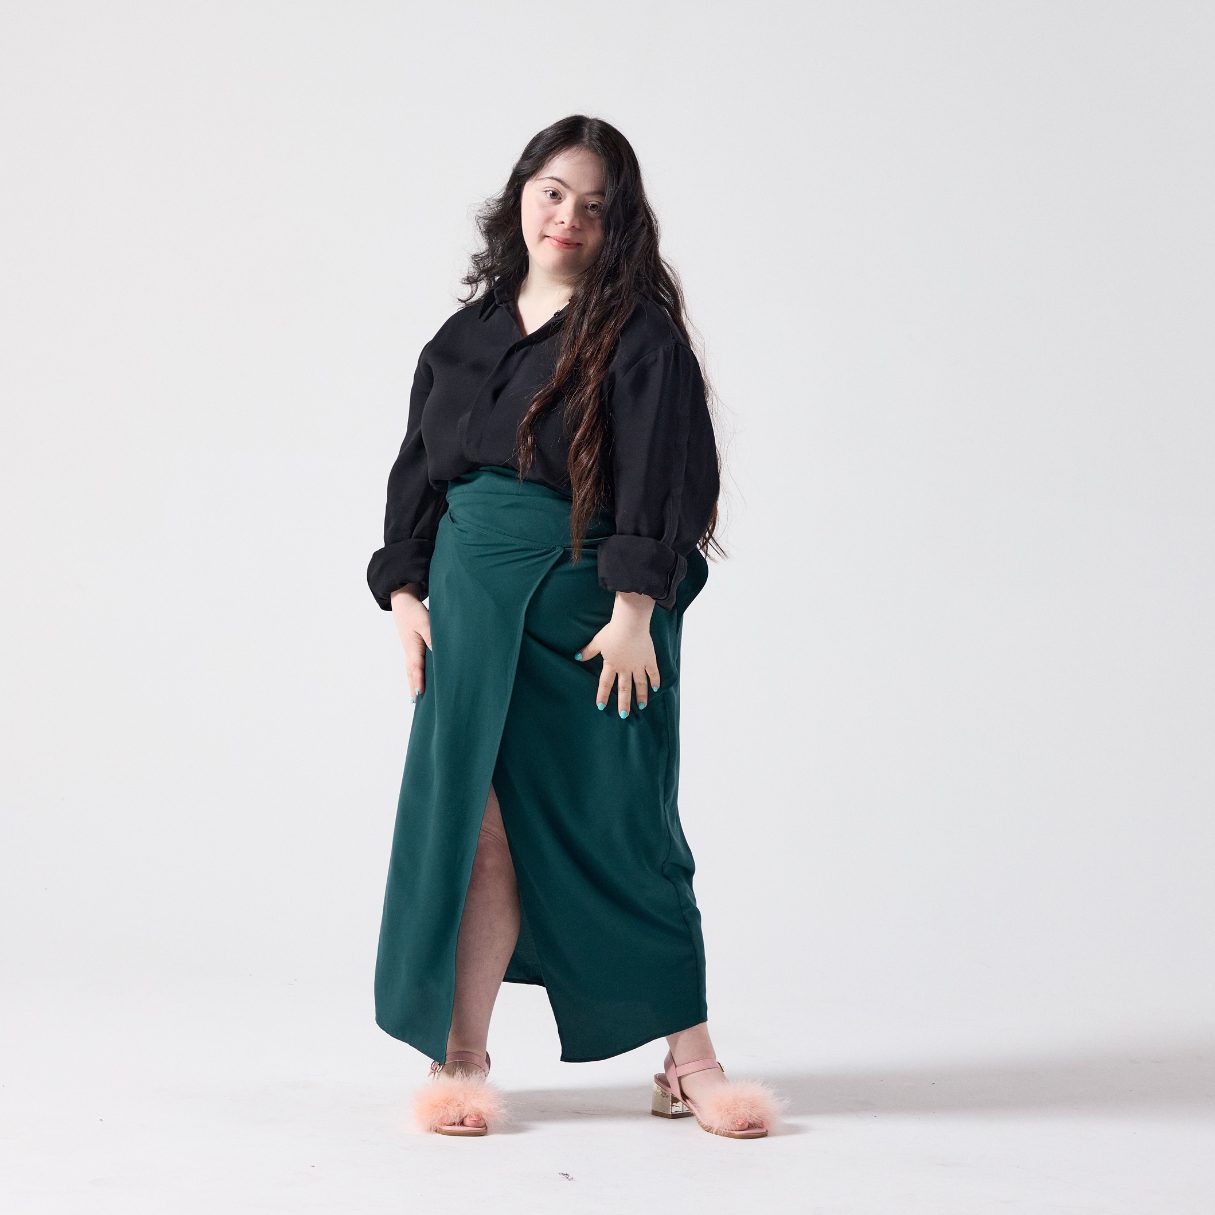 A white model with long dark brown hair is smiling at the camera. She is wearing a wrap skit in forest green paired with a black shirt and her own heels. She is standing with her legs posed apart and her hands resting on her sides. 